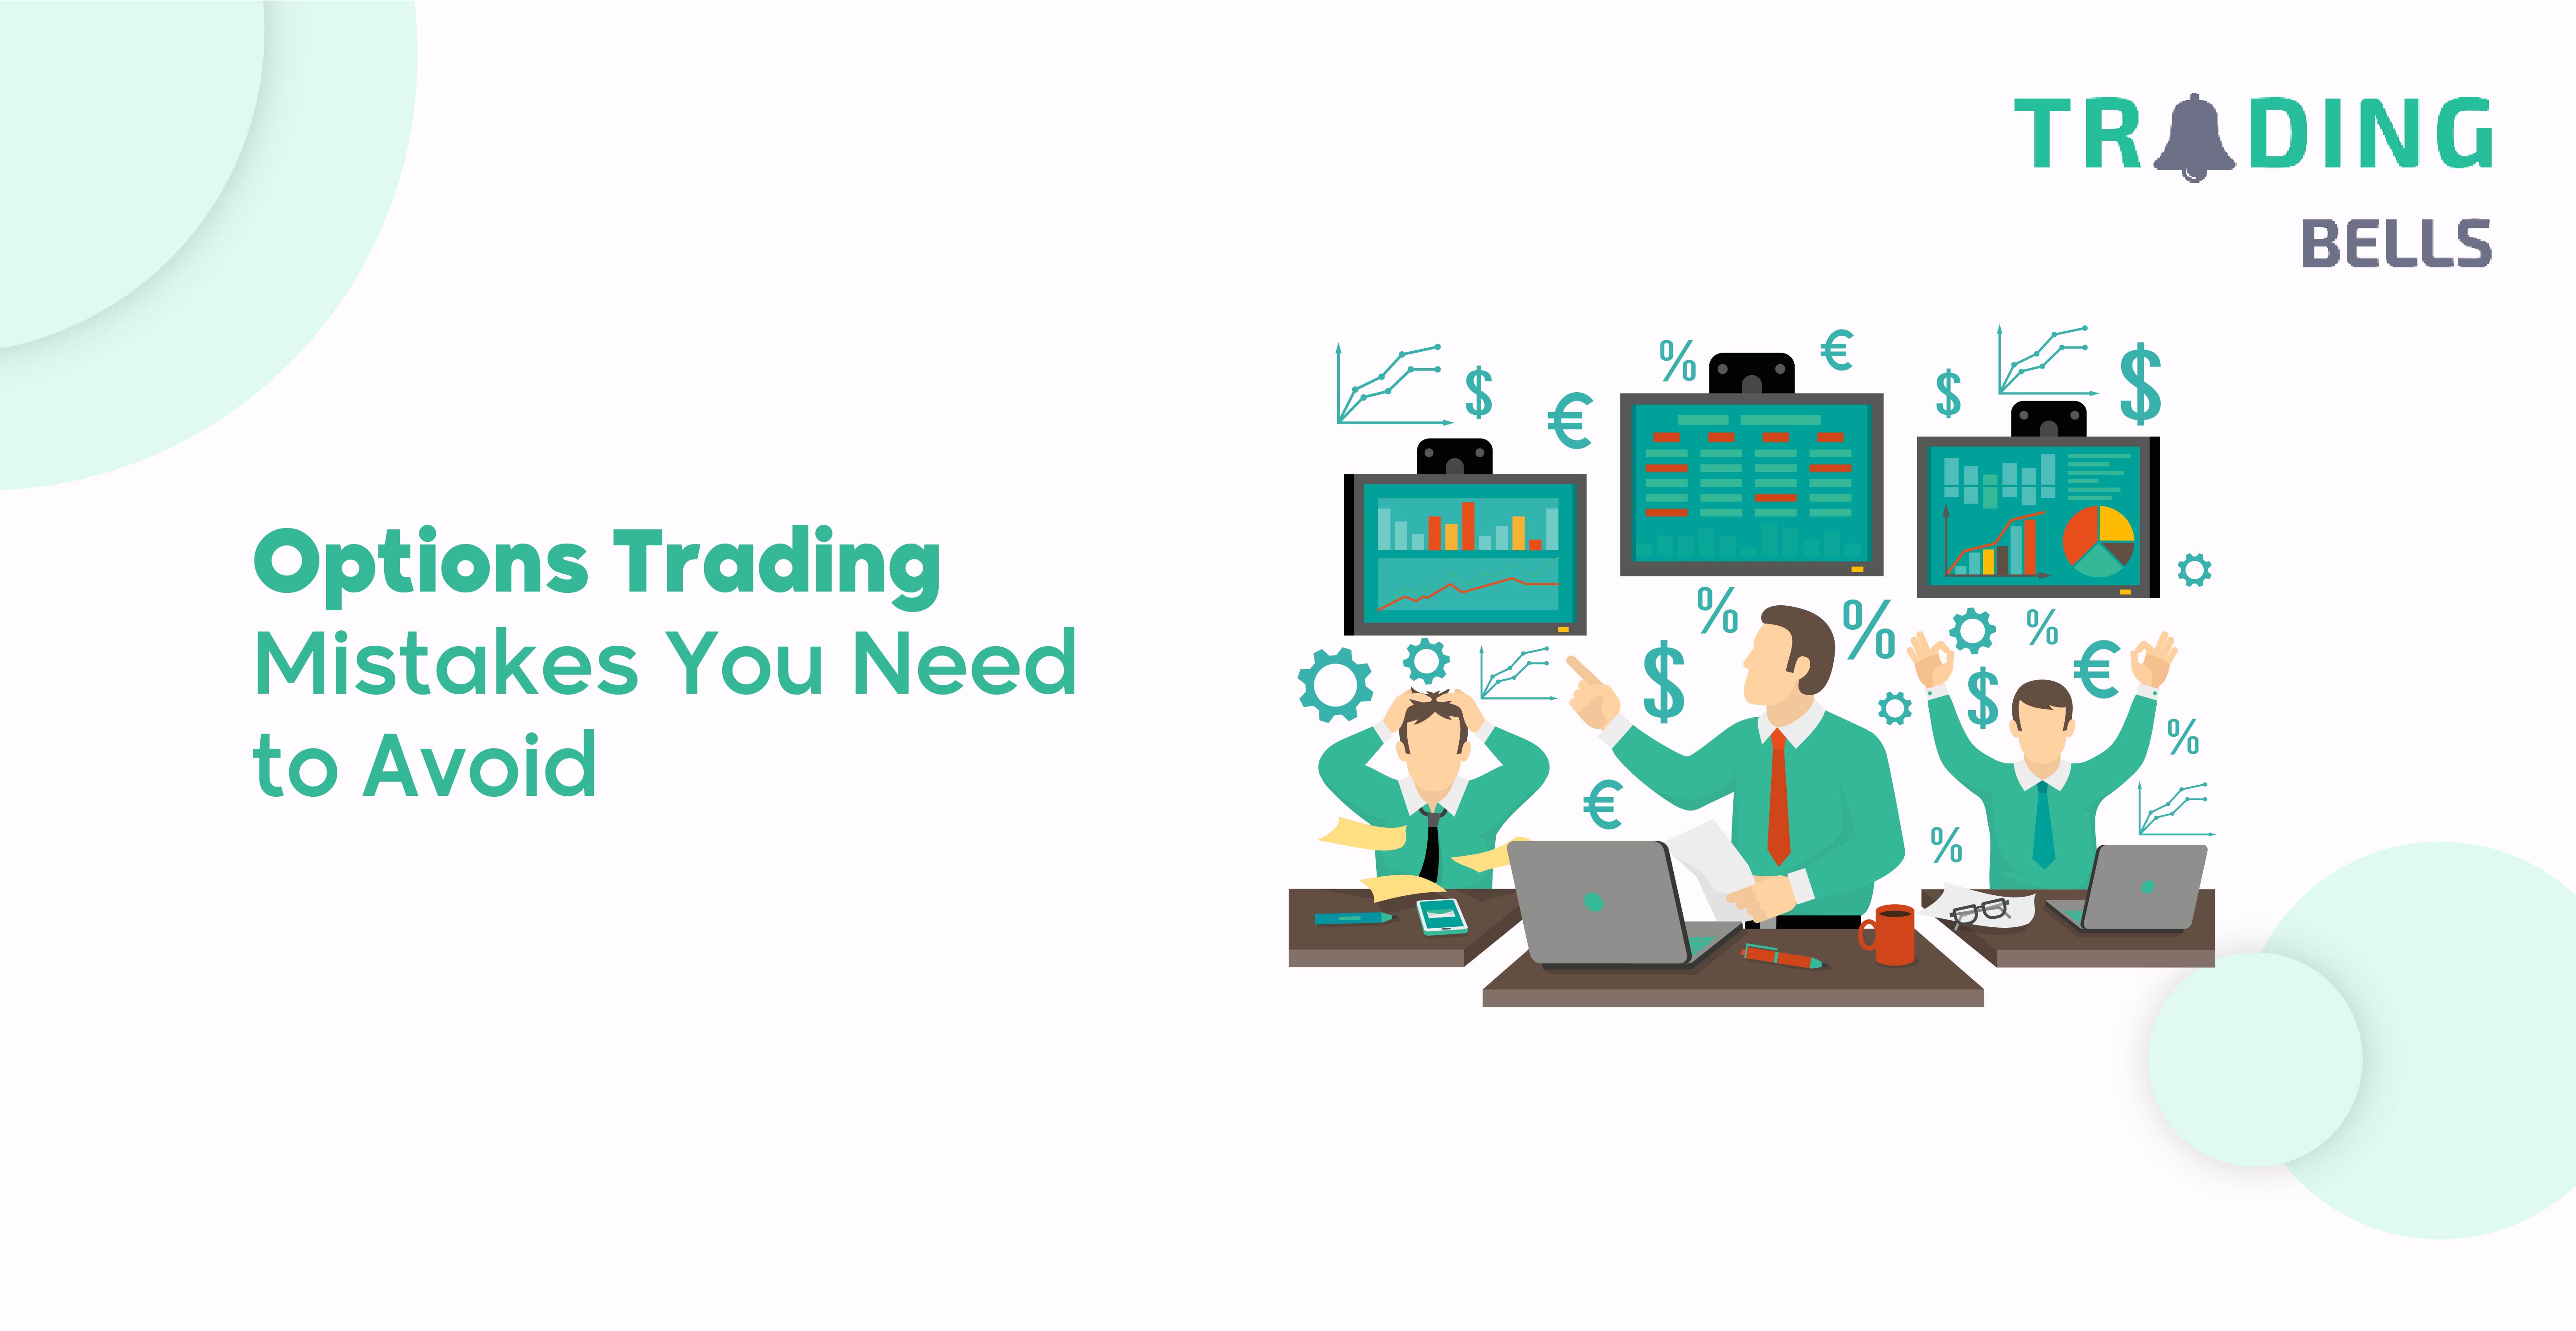 Options Trading Mistakes You Need to Avoid